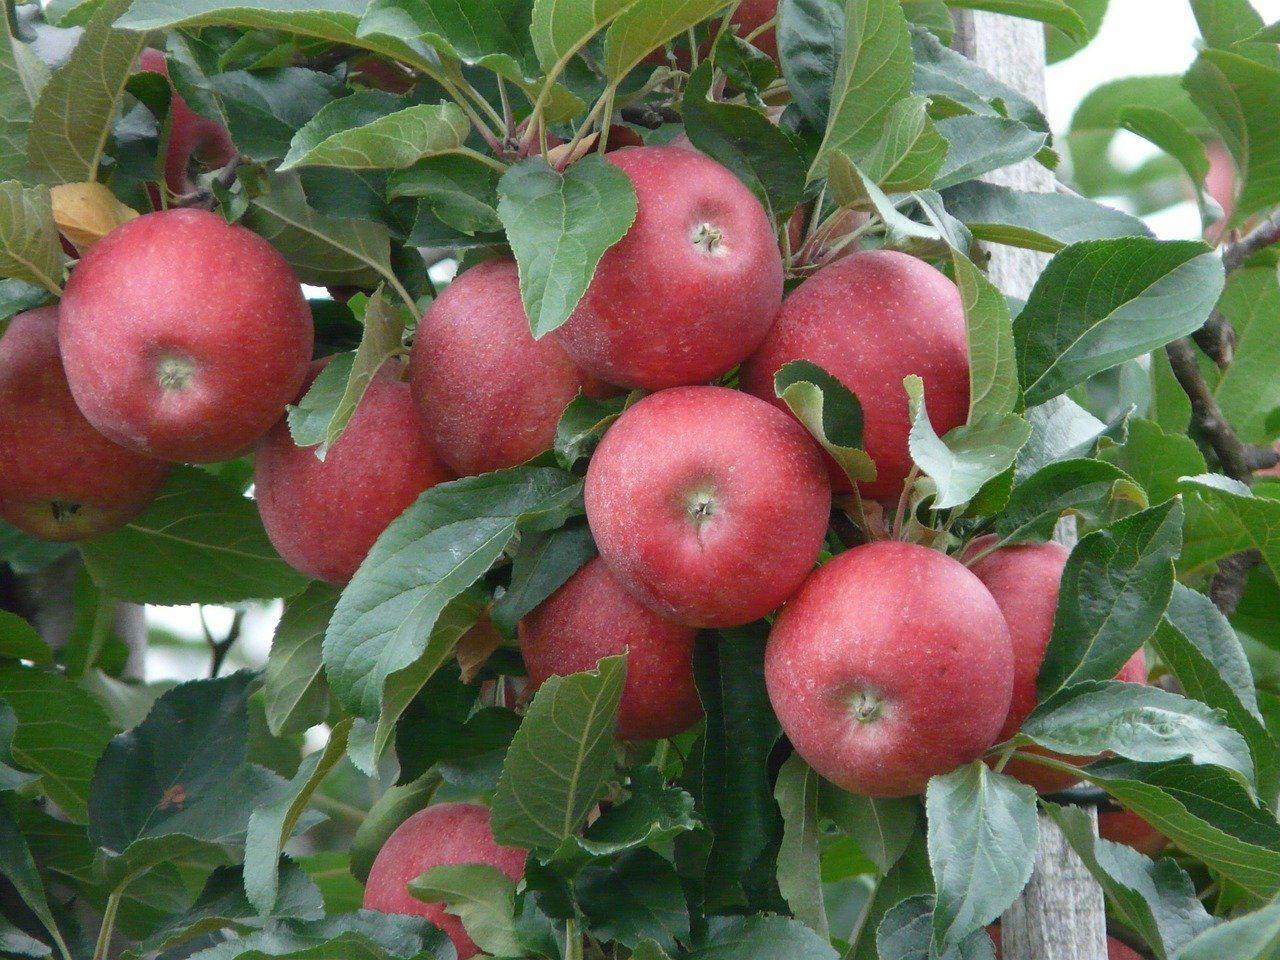 A bunch of red apples hanging from a tree